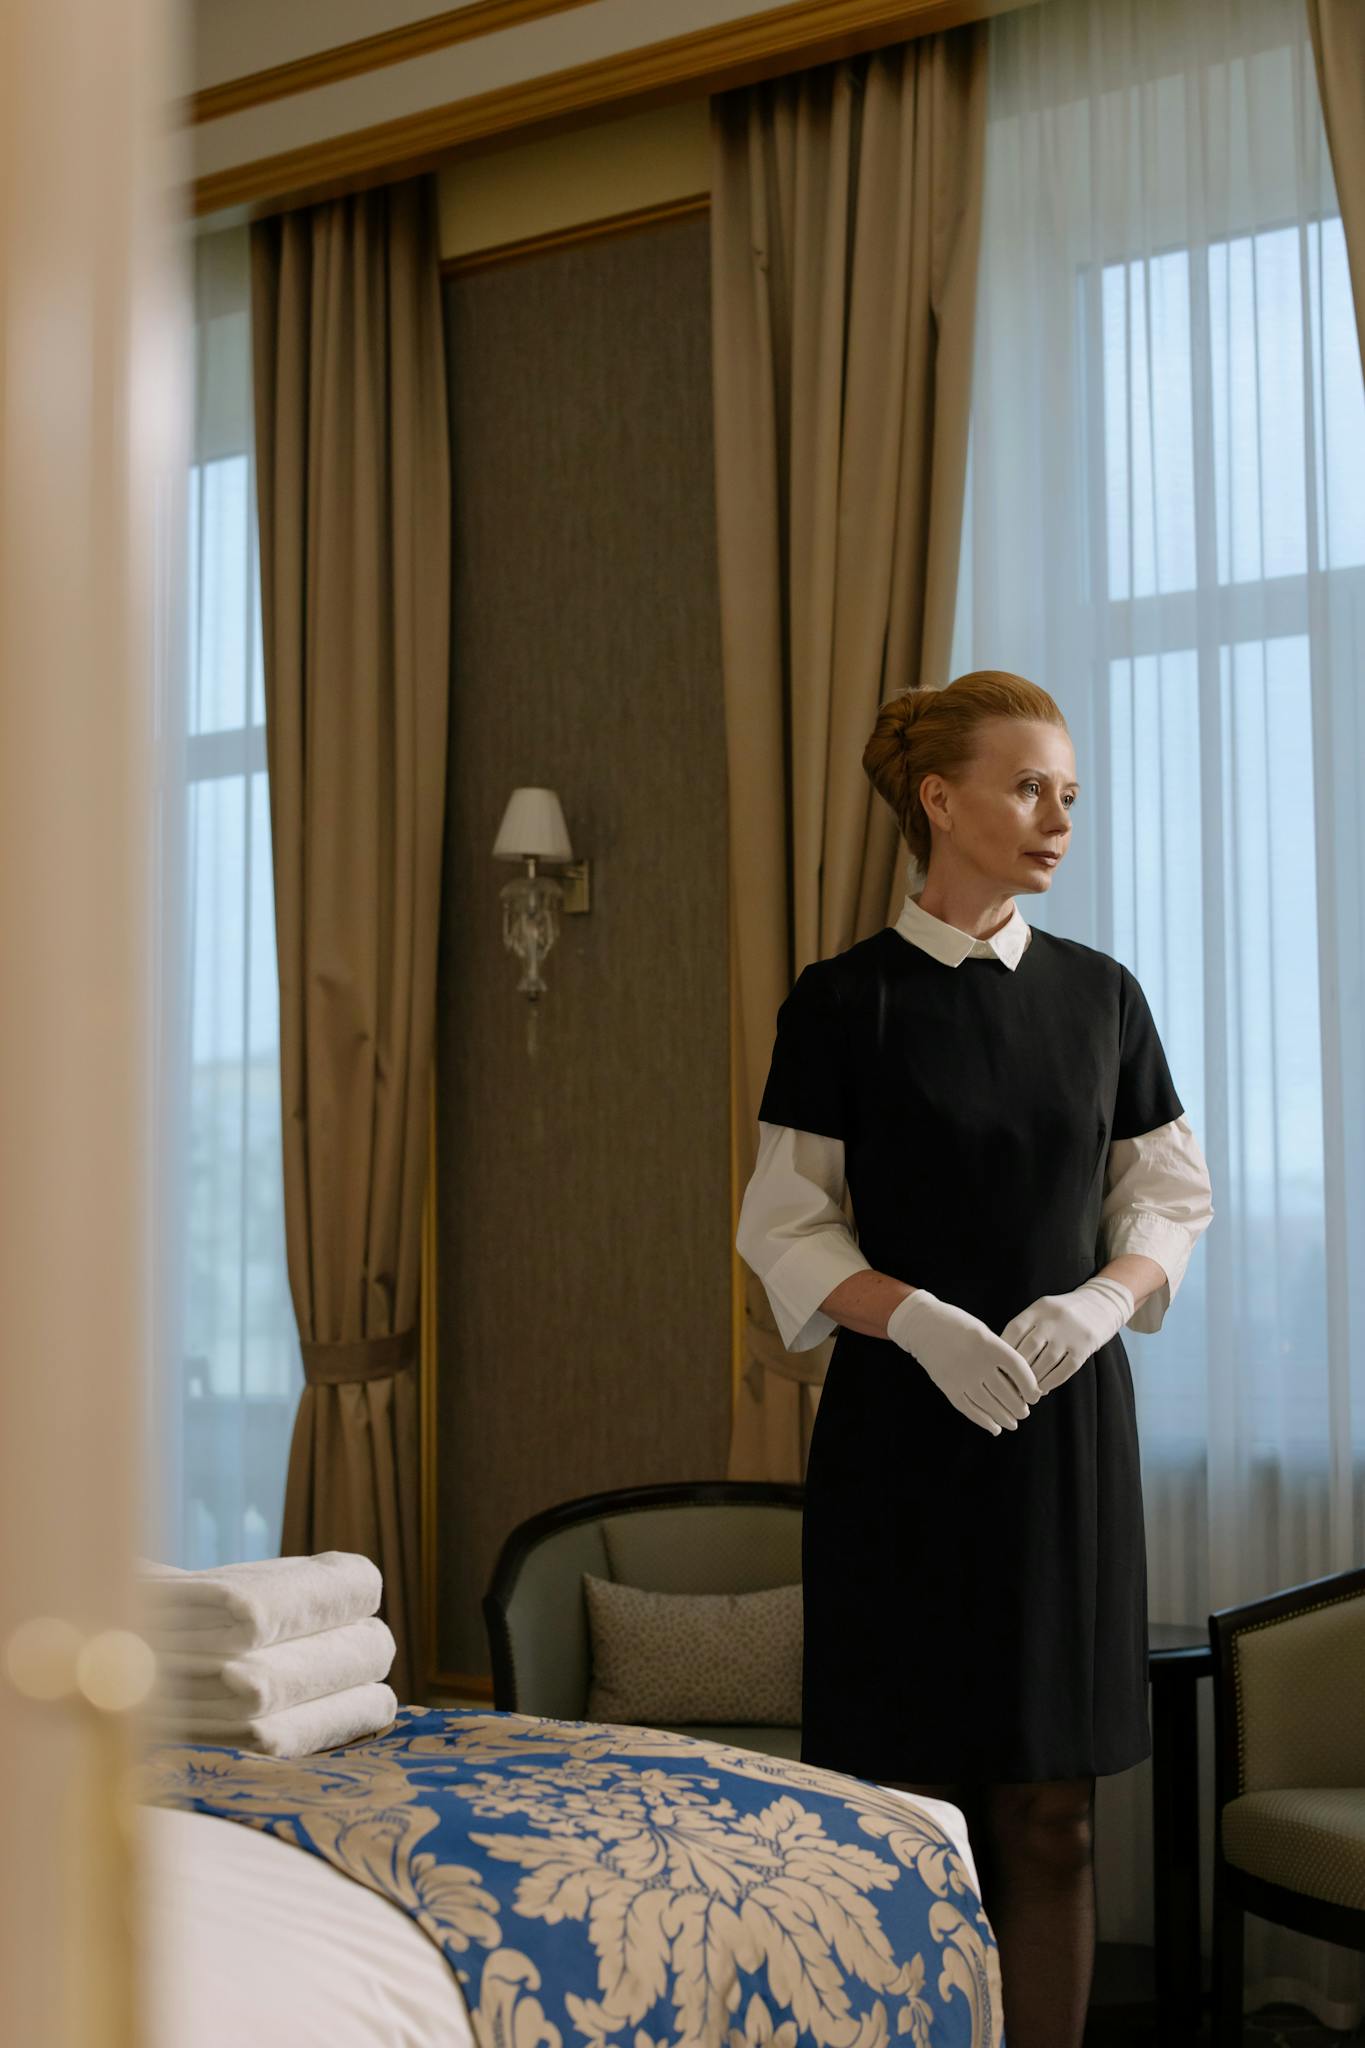 Woman in Black and White Uniform Standing Beside the Bed of a Hotel Room